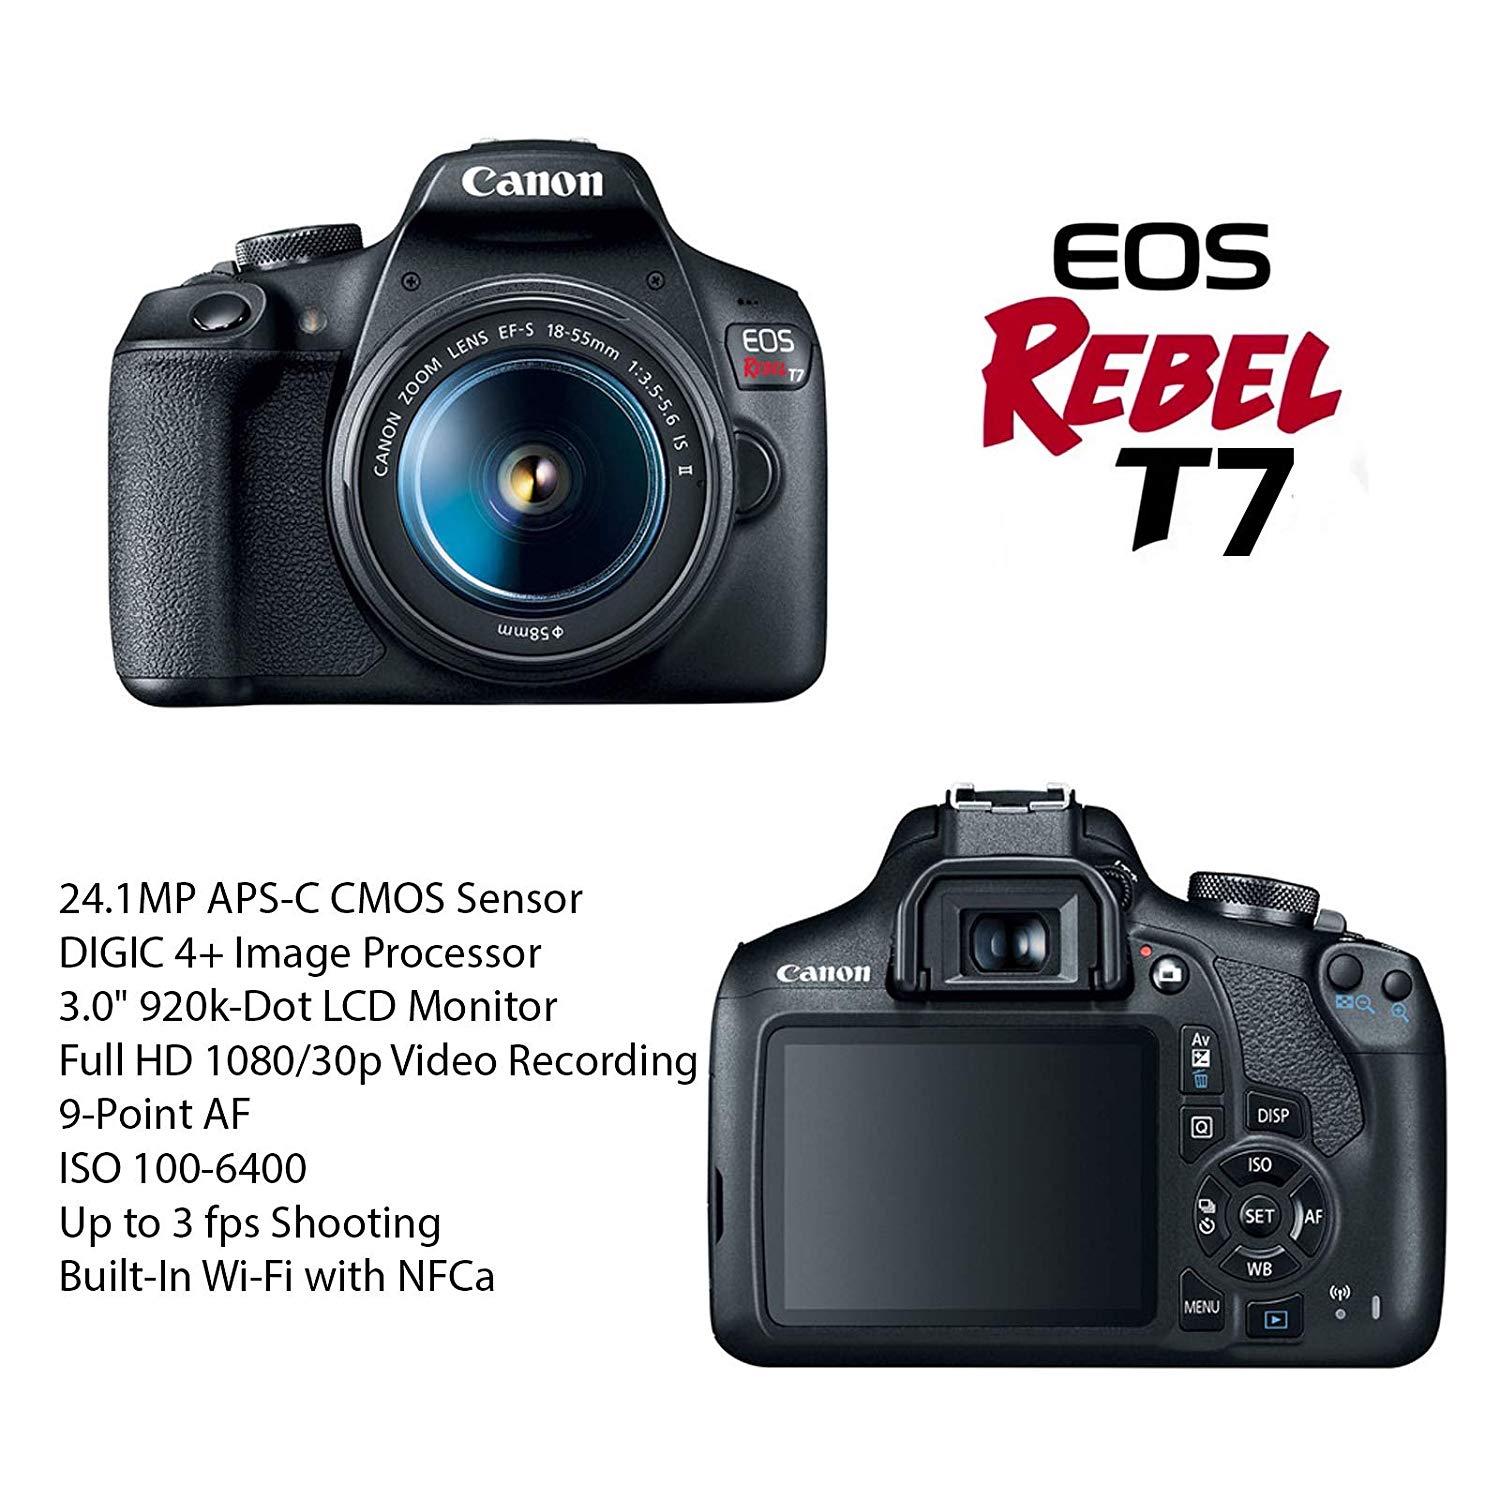 Canon EOS Rebel T7 DSLR Camera Bundle with Canon EF-S 18-55mm f/3.5-5.6 is II Lens + 2pc SanDisk 32GB Memory Cards + Accessory Kit - image 2 of 7